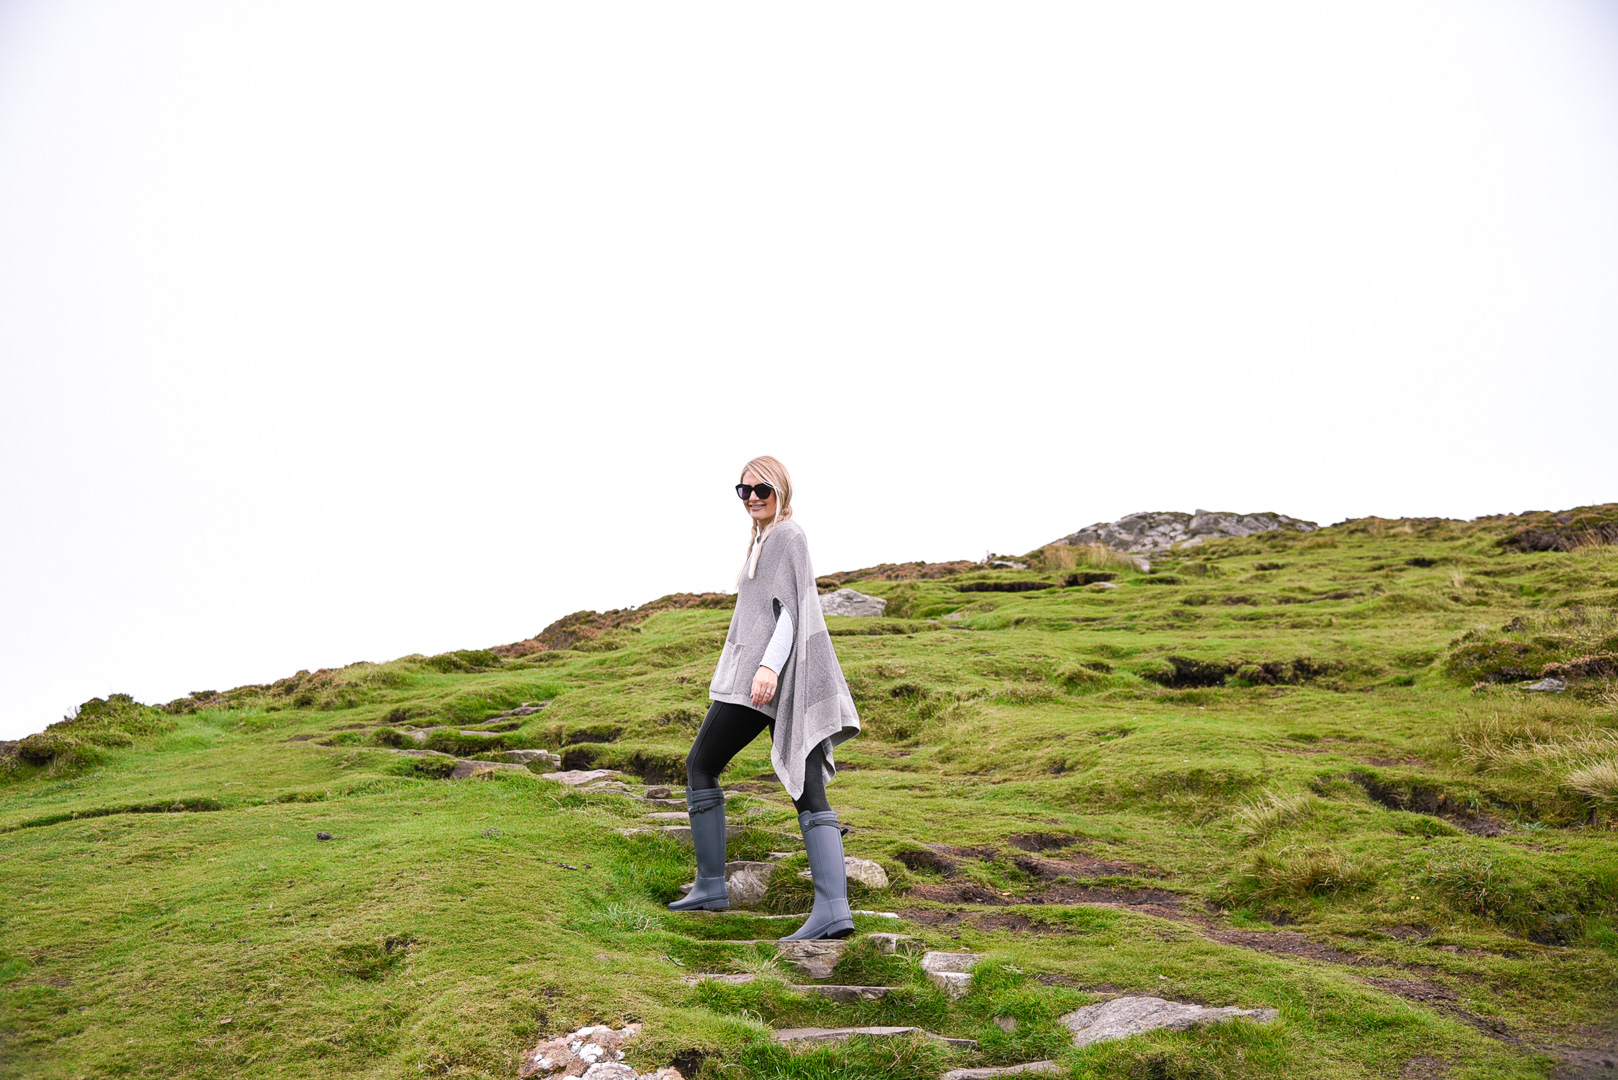 Jenna Colgrove in an Anthropologie Madison Park Poncho at Slieve League, Ireland